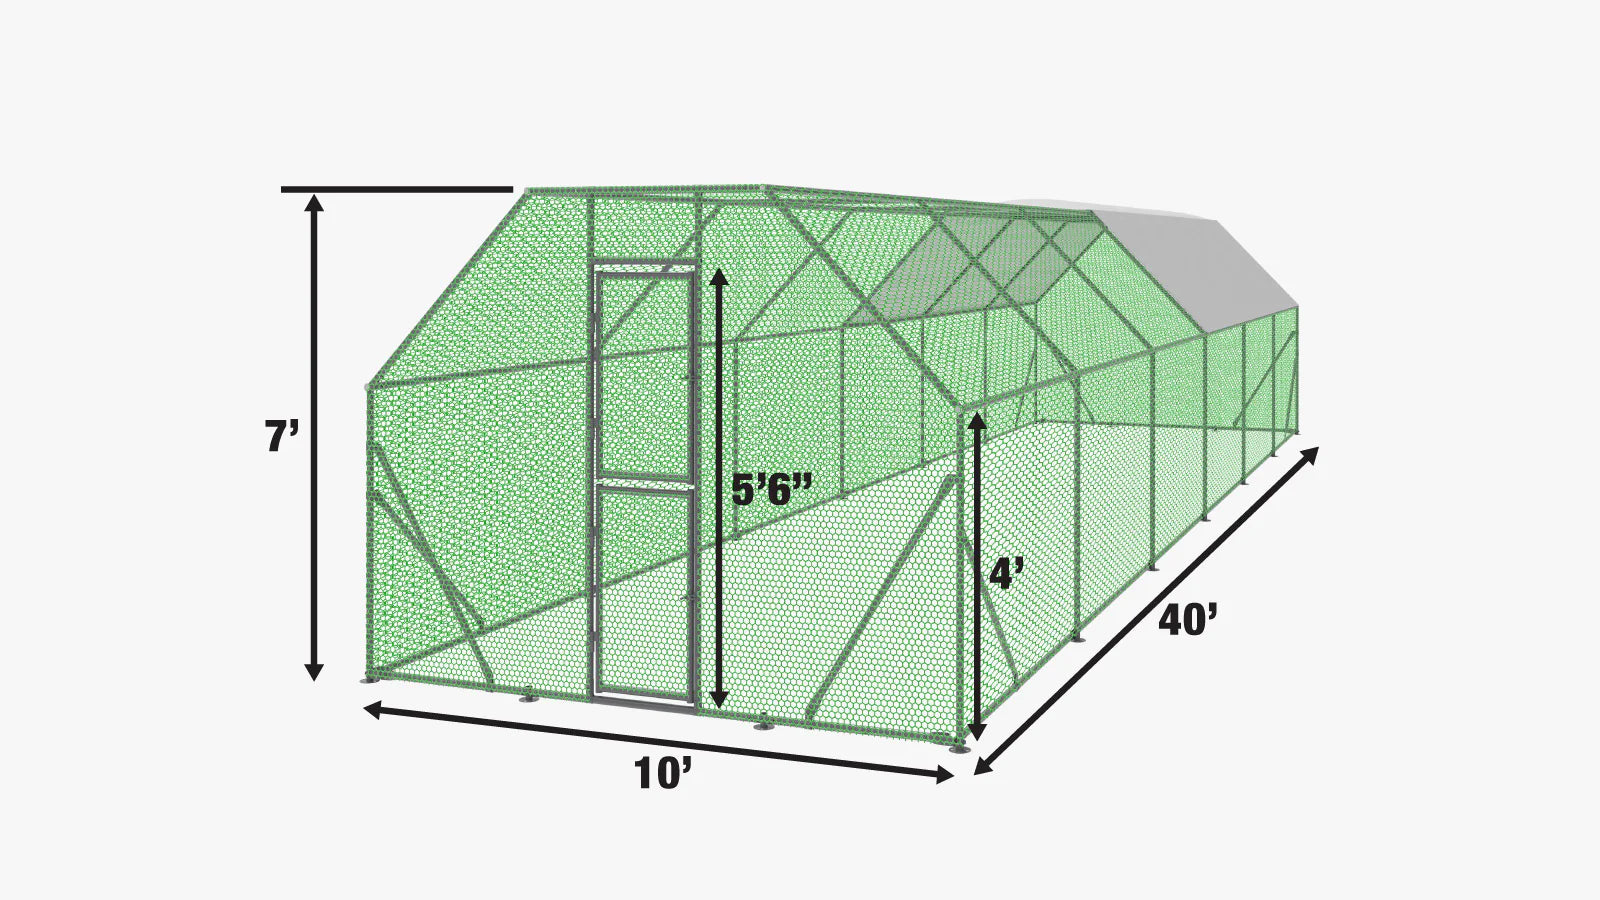 TMG Industrial 10’ x 40’ Wire Mesh Chicken Run Shelter Coop, Galvanized Steel, 400 Sq-Ft, Lockable Gate, PVC Coated Mesh, TMG-CRS1040-specifications-image